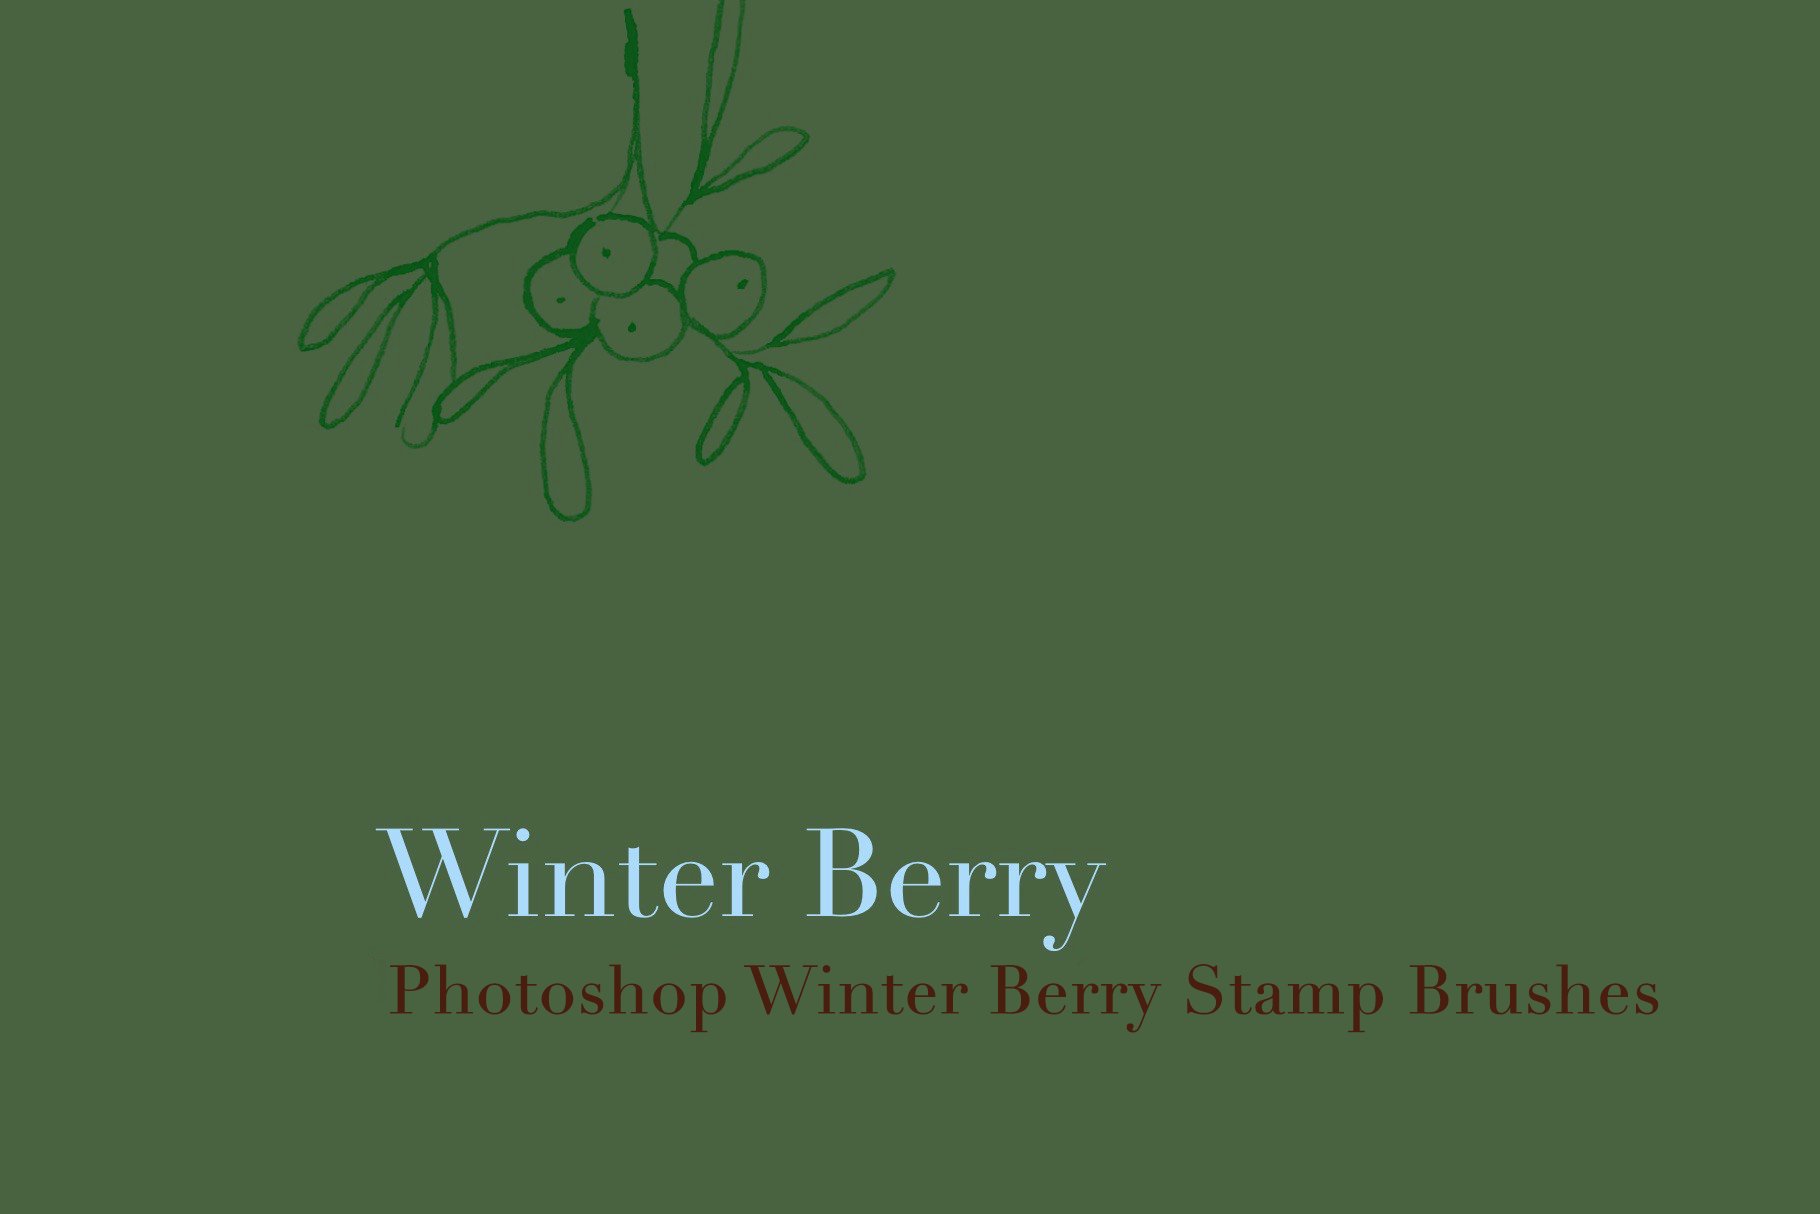 photoshop winter berry stamp brushes copy 2 799